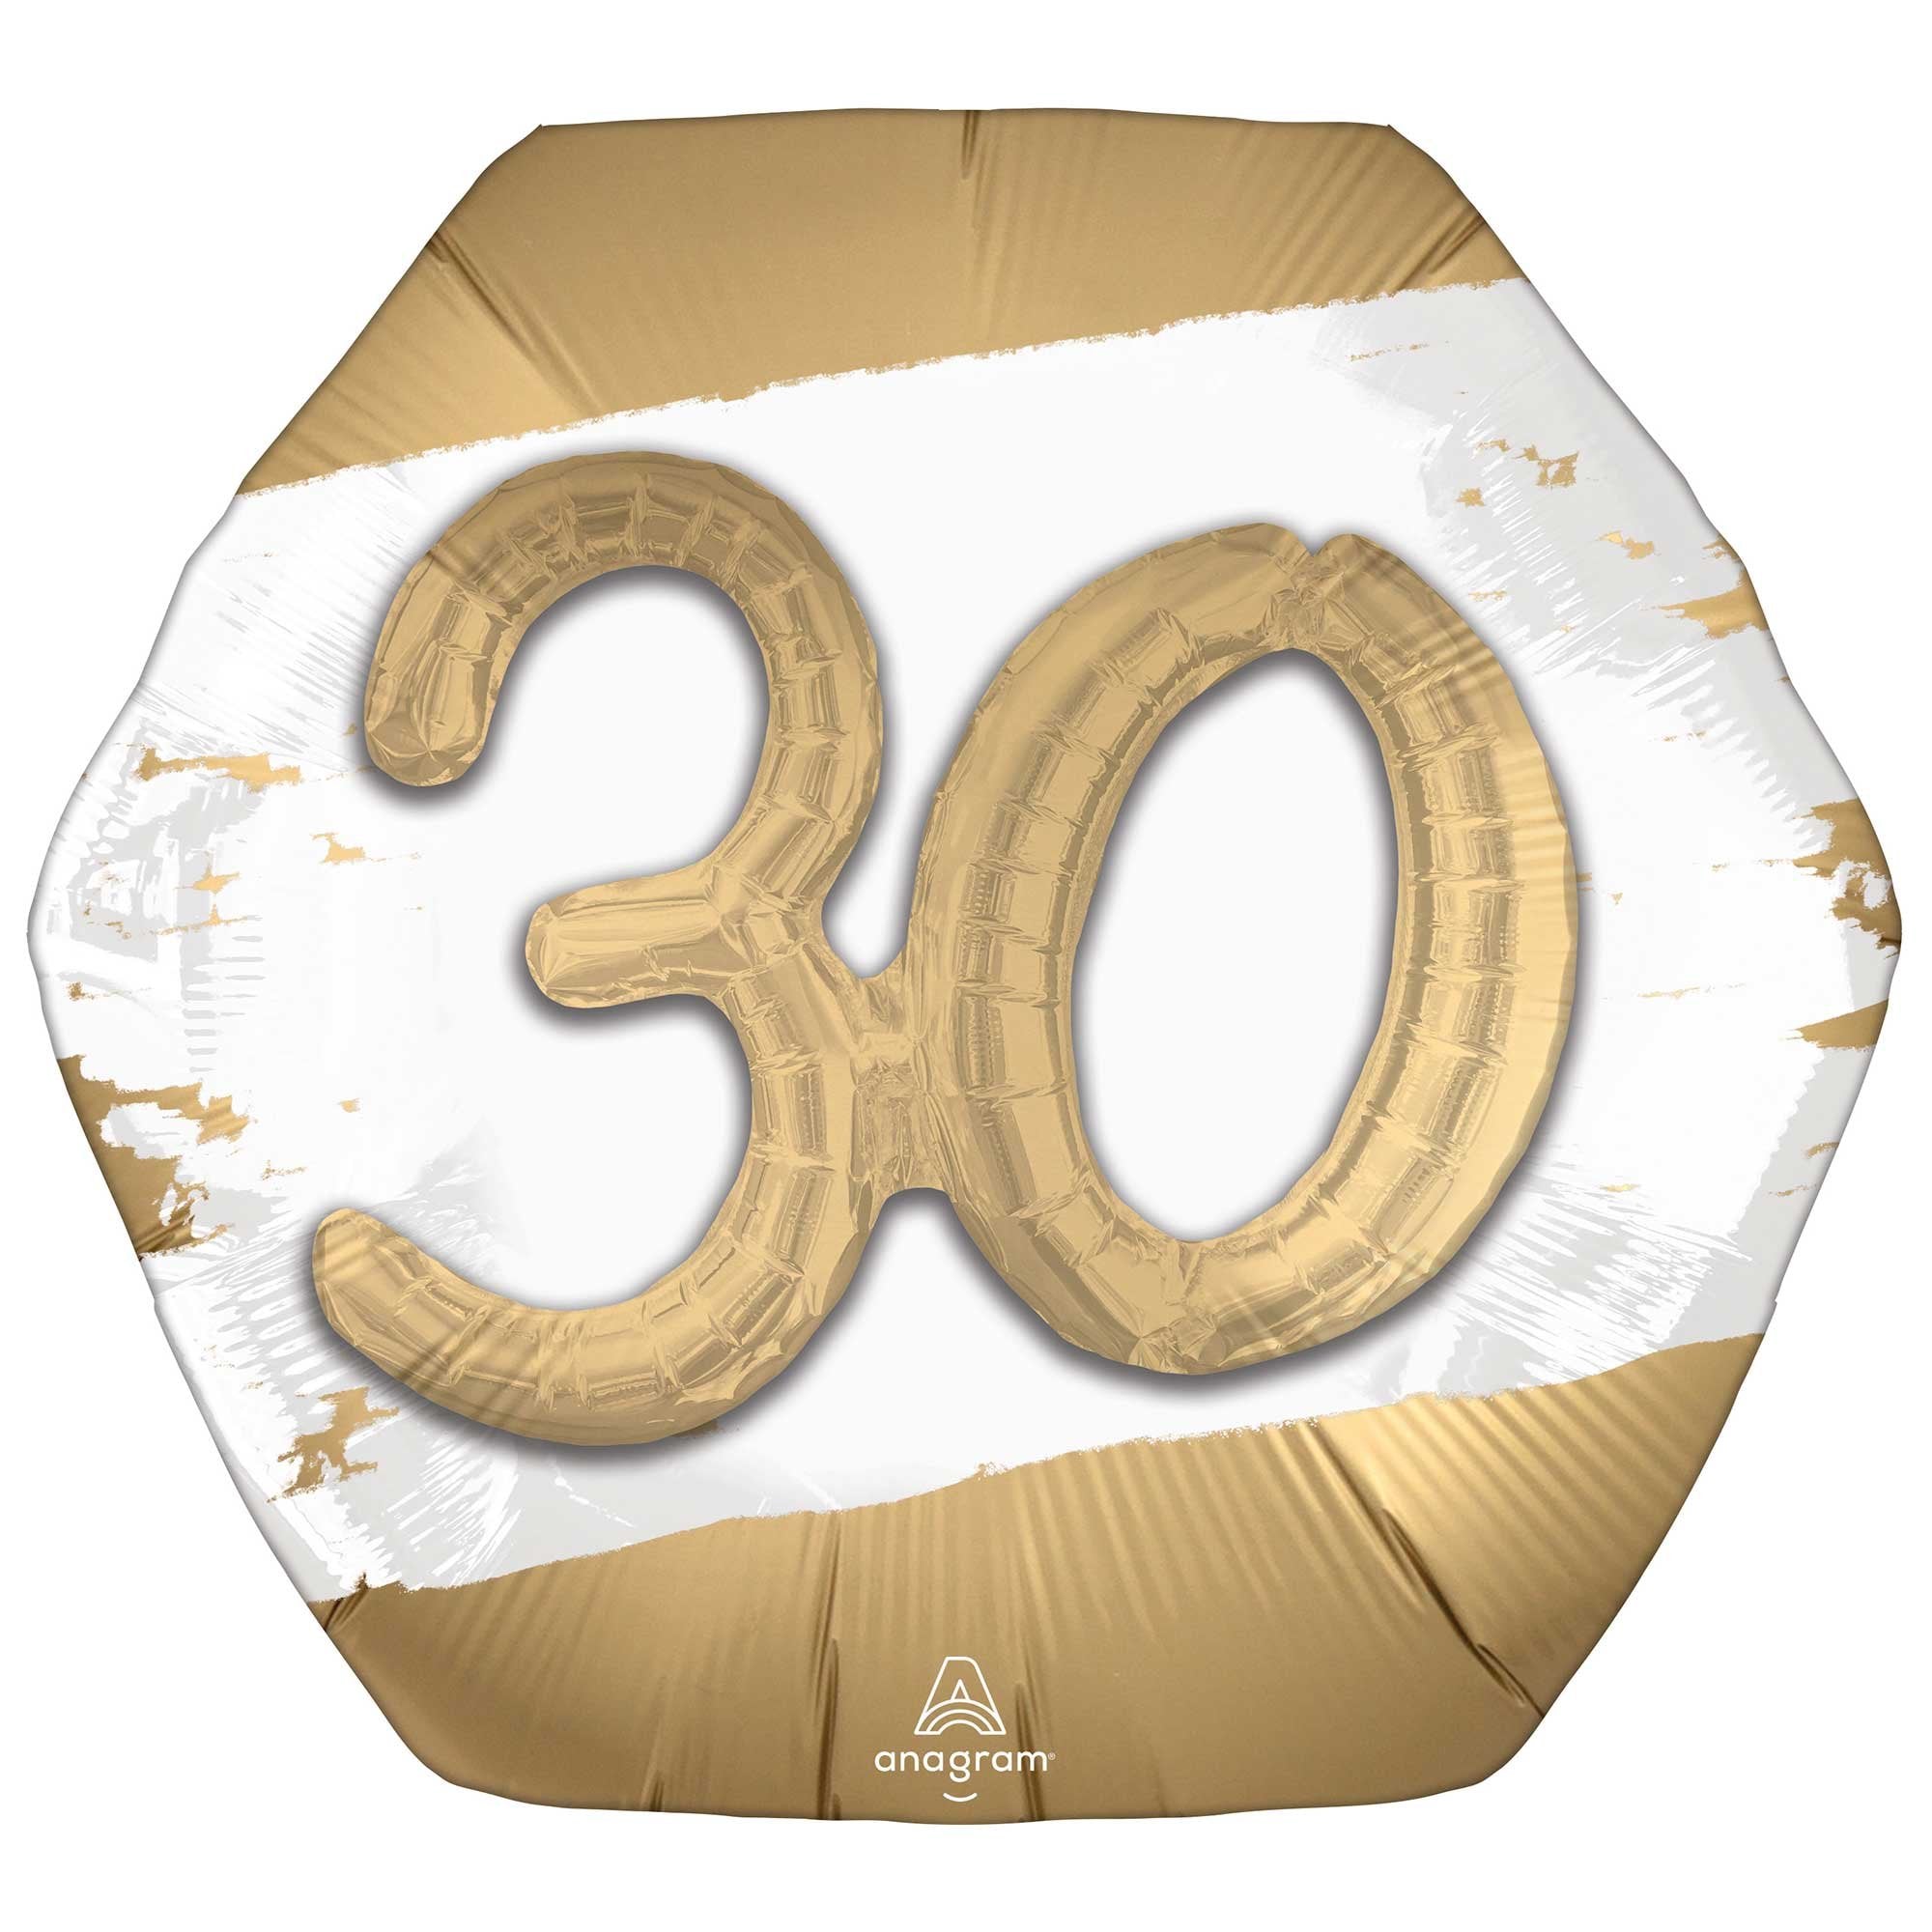 Celebrate in style with our chic and trendy 30th themed party decorations! From classy 30th balloons to dazzling 30th party banners, we have everything you need to make any milestone birthday unforgettable!